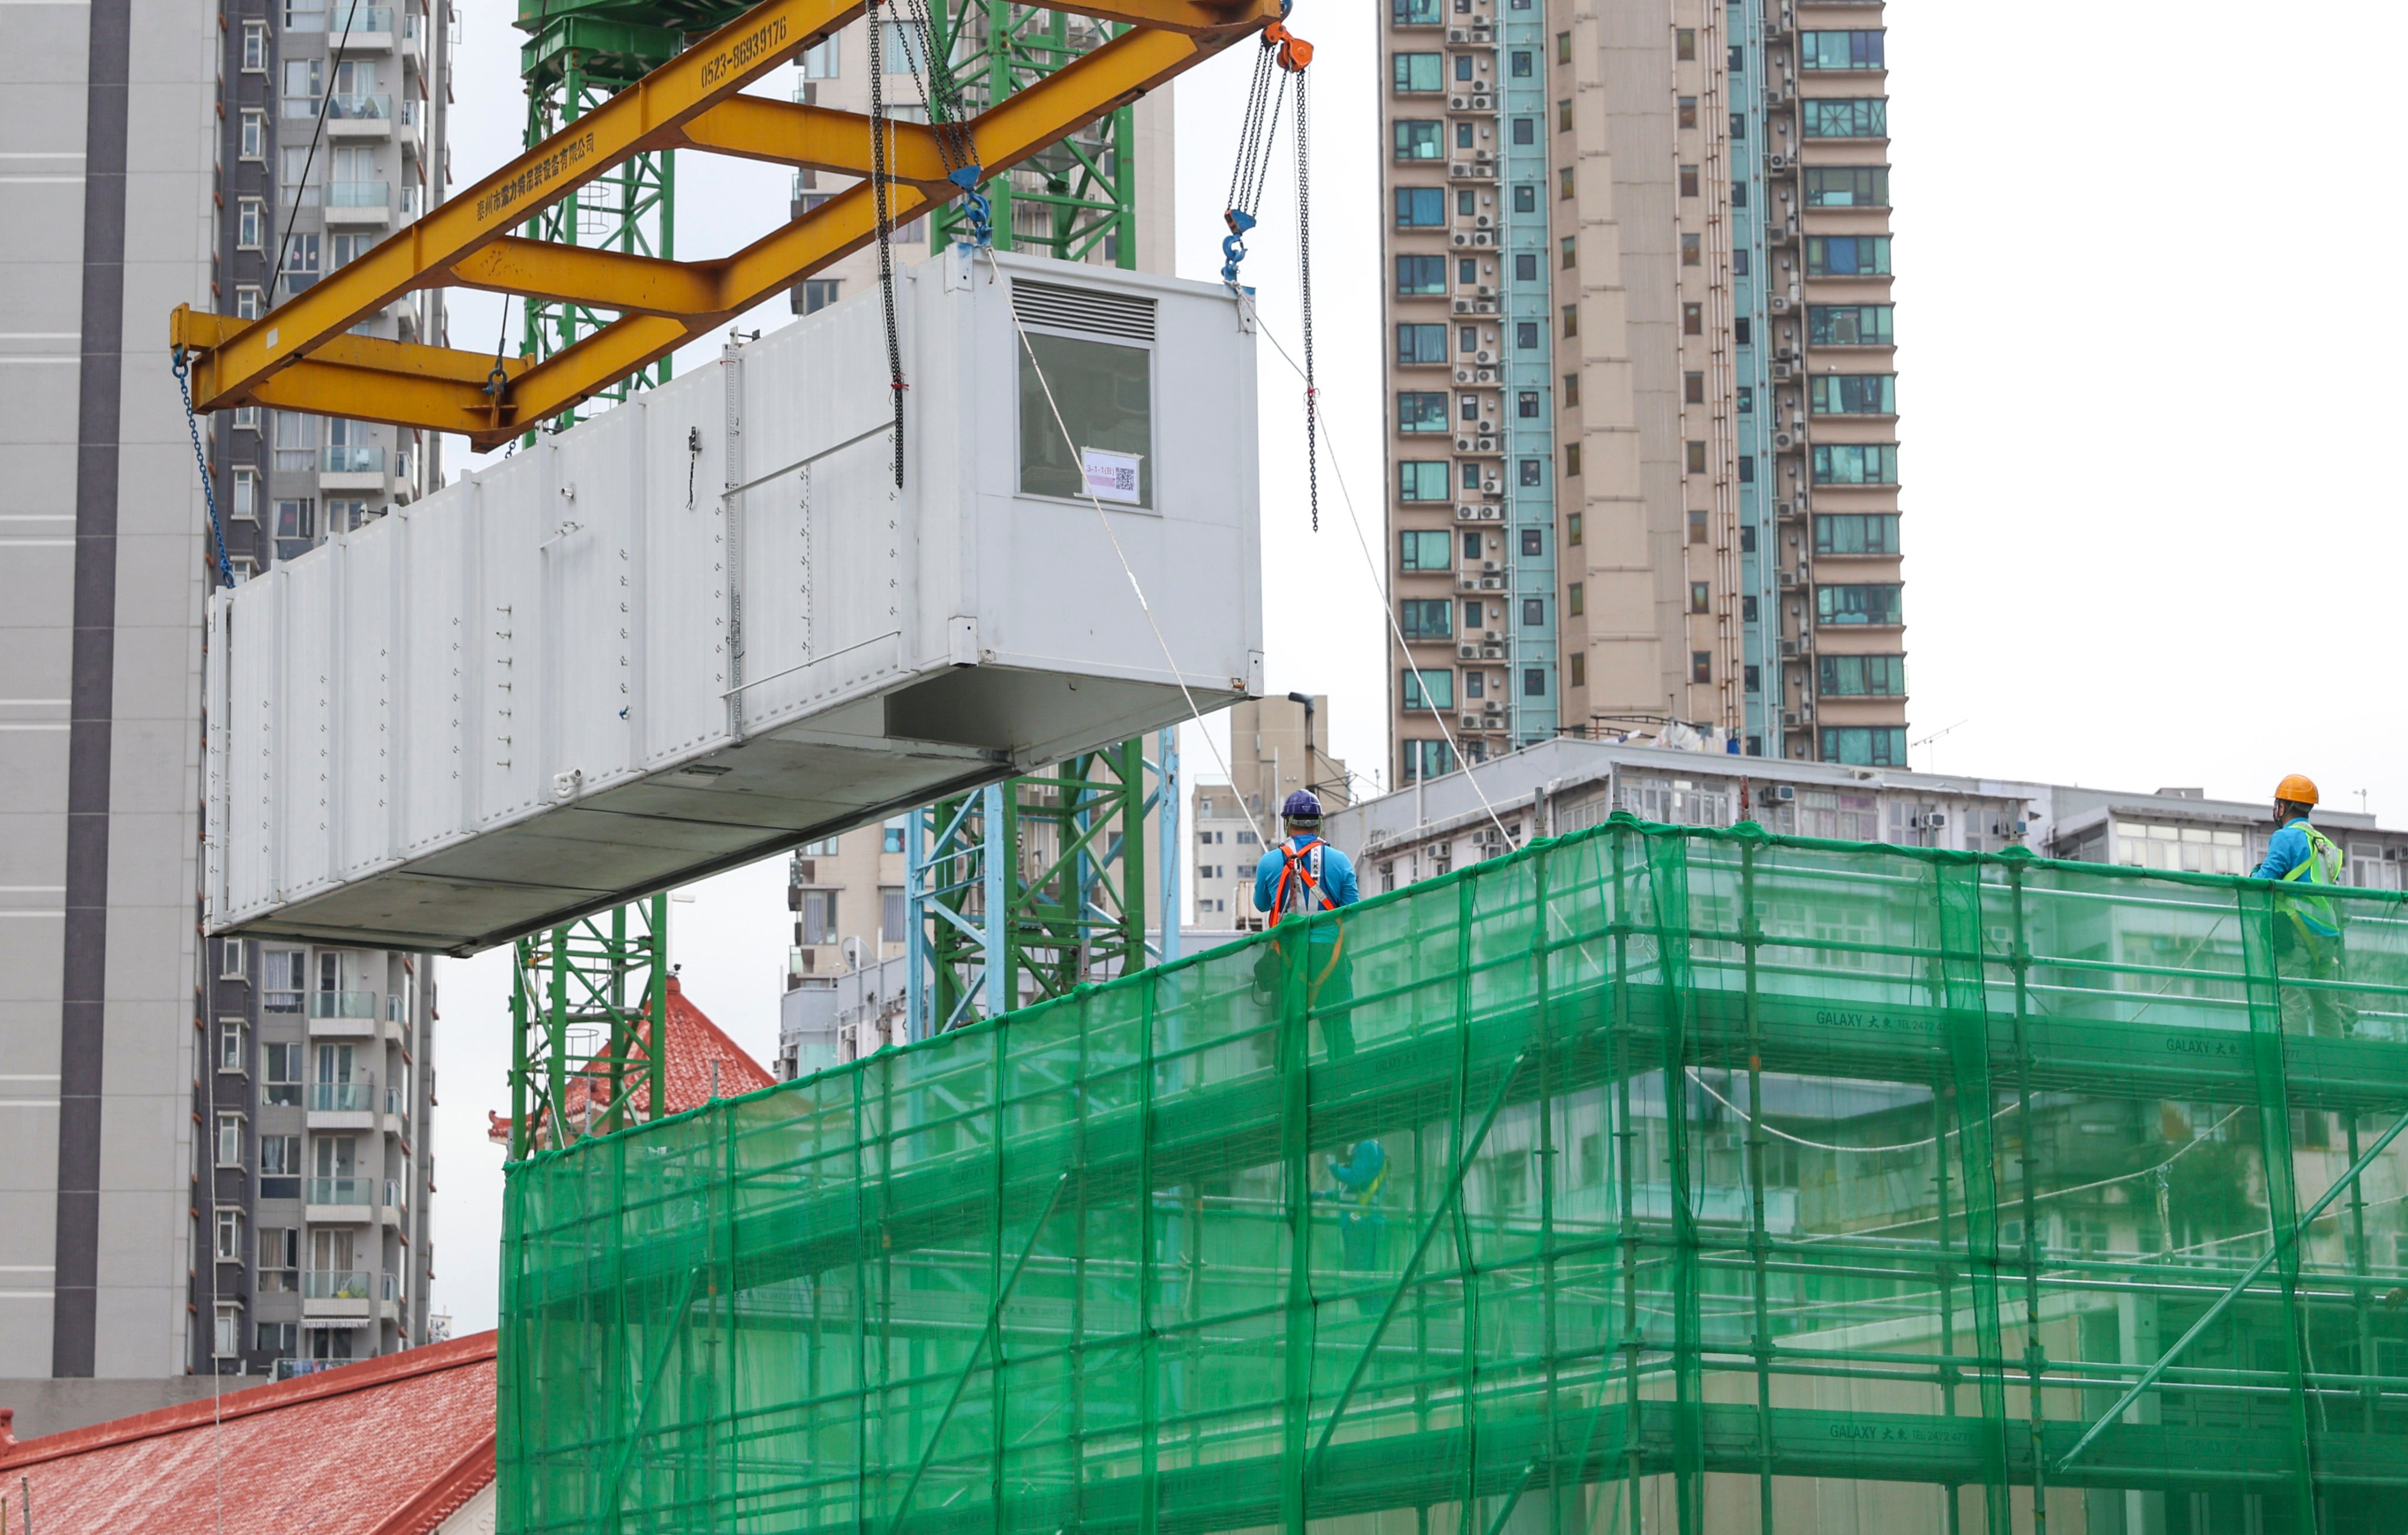 The “modular integrated construction” process employs free-standing, integrated modules from a mainland Chinese factory that undergo quality inspections before being installed at the project site. Photo: Yik Yeung-man